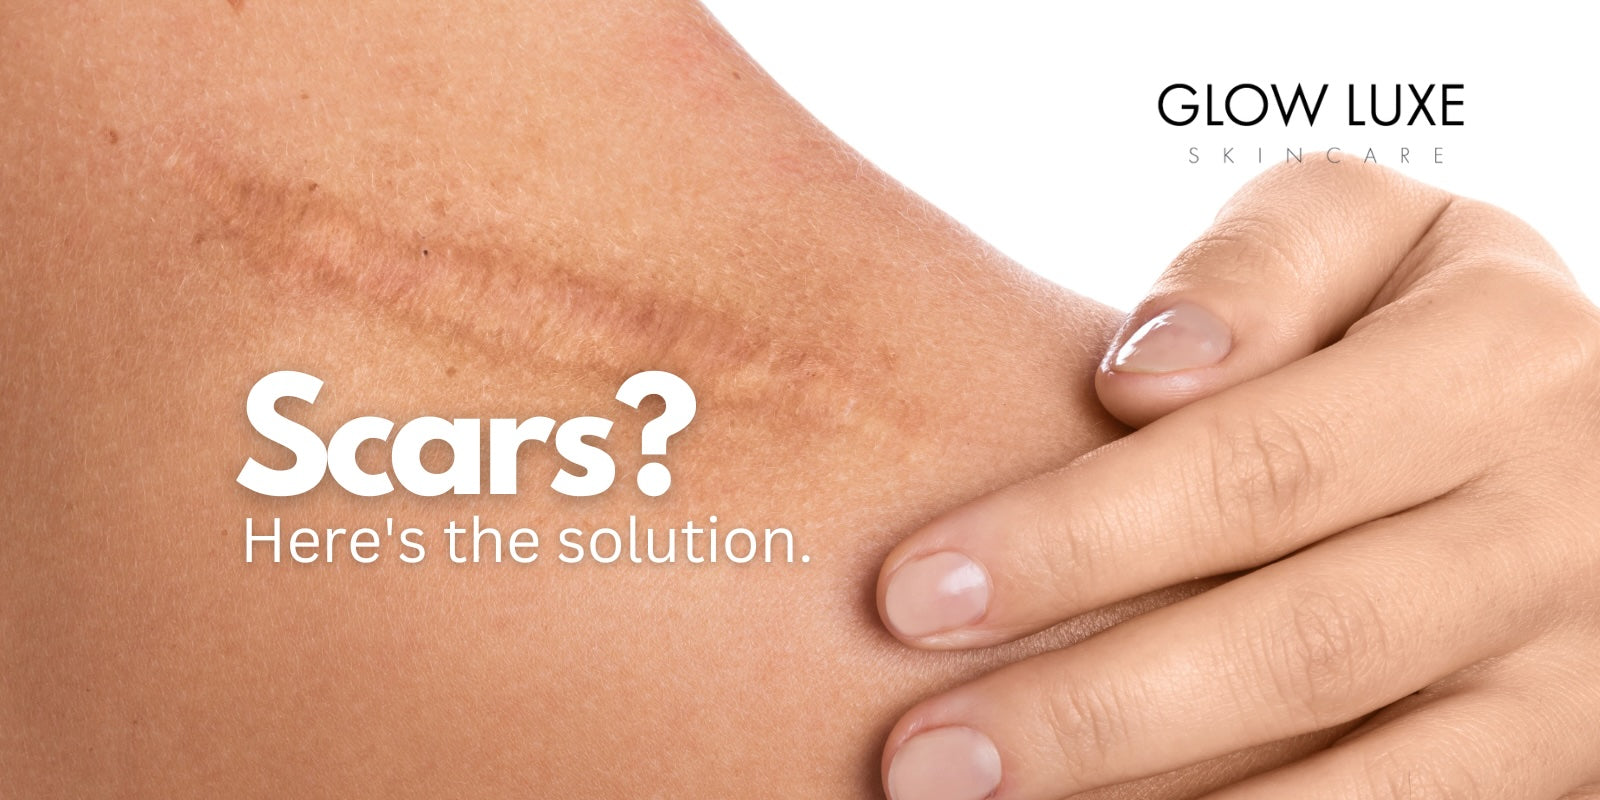 Morpheus8 and treatments better than Morpheus8. Treatment for scars.